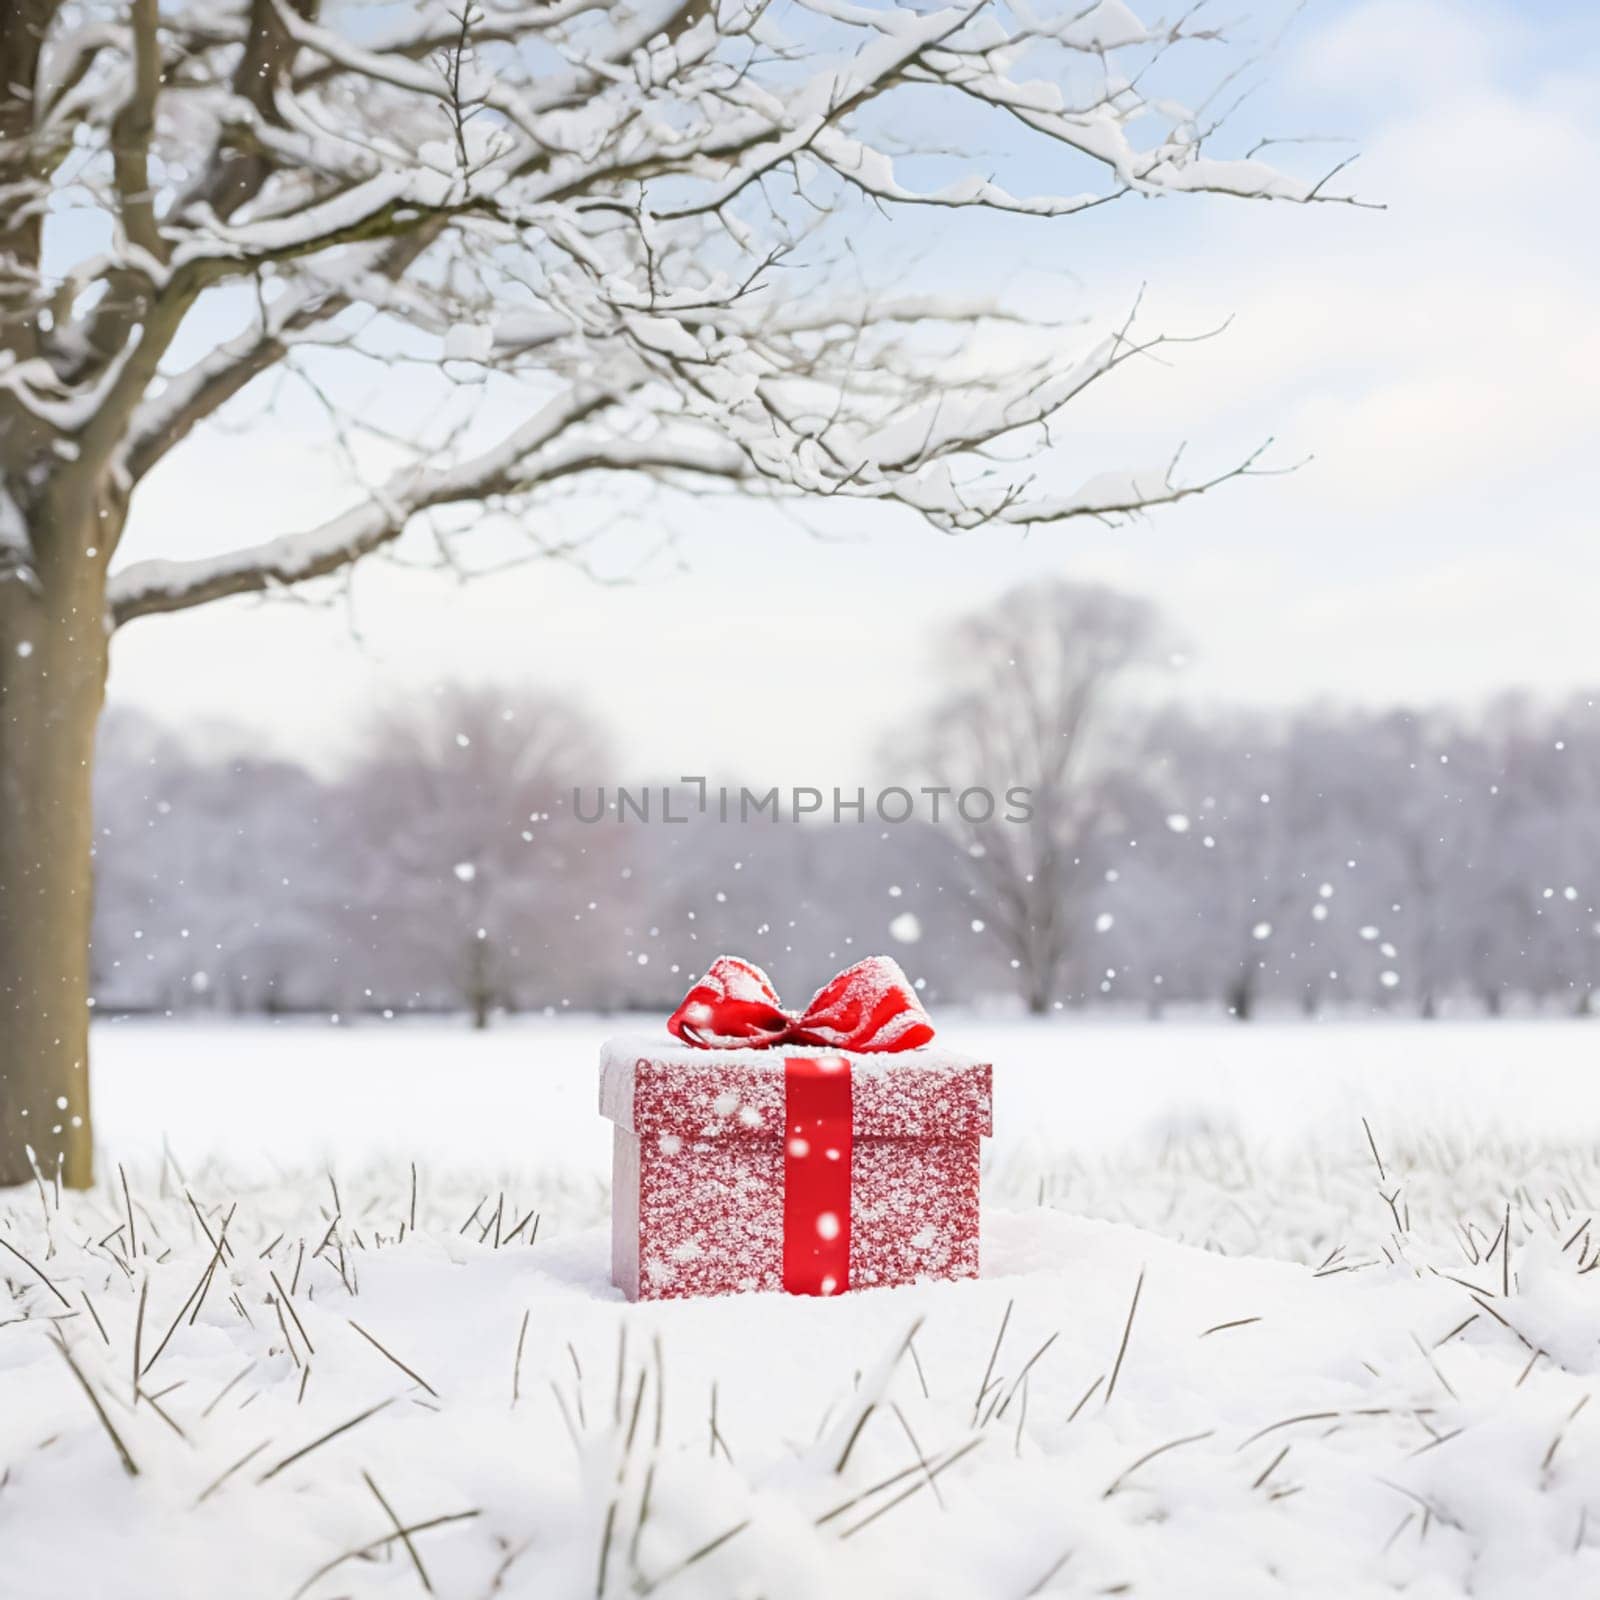 Christmas holiday gift and present, gift box in the snow in snowfall winter countryside nature for boxing day, holidays shopping sale idea